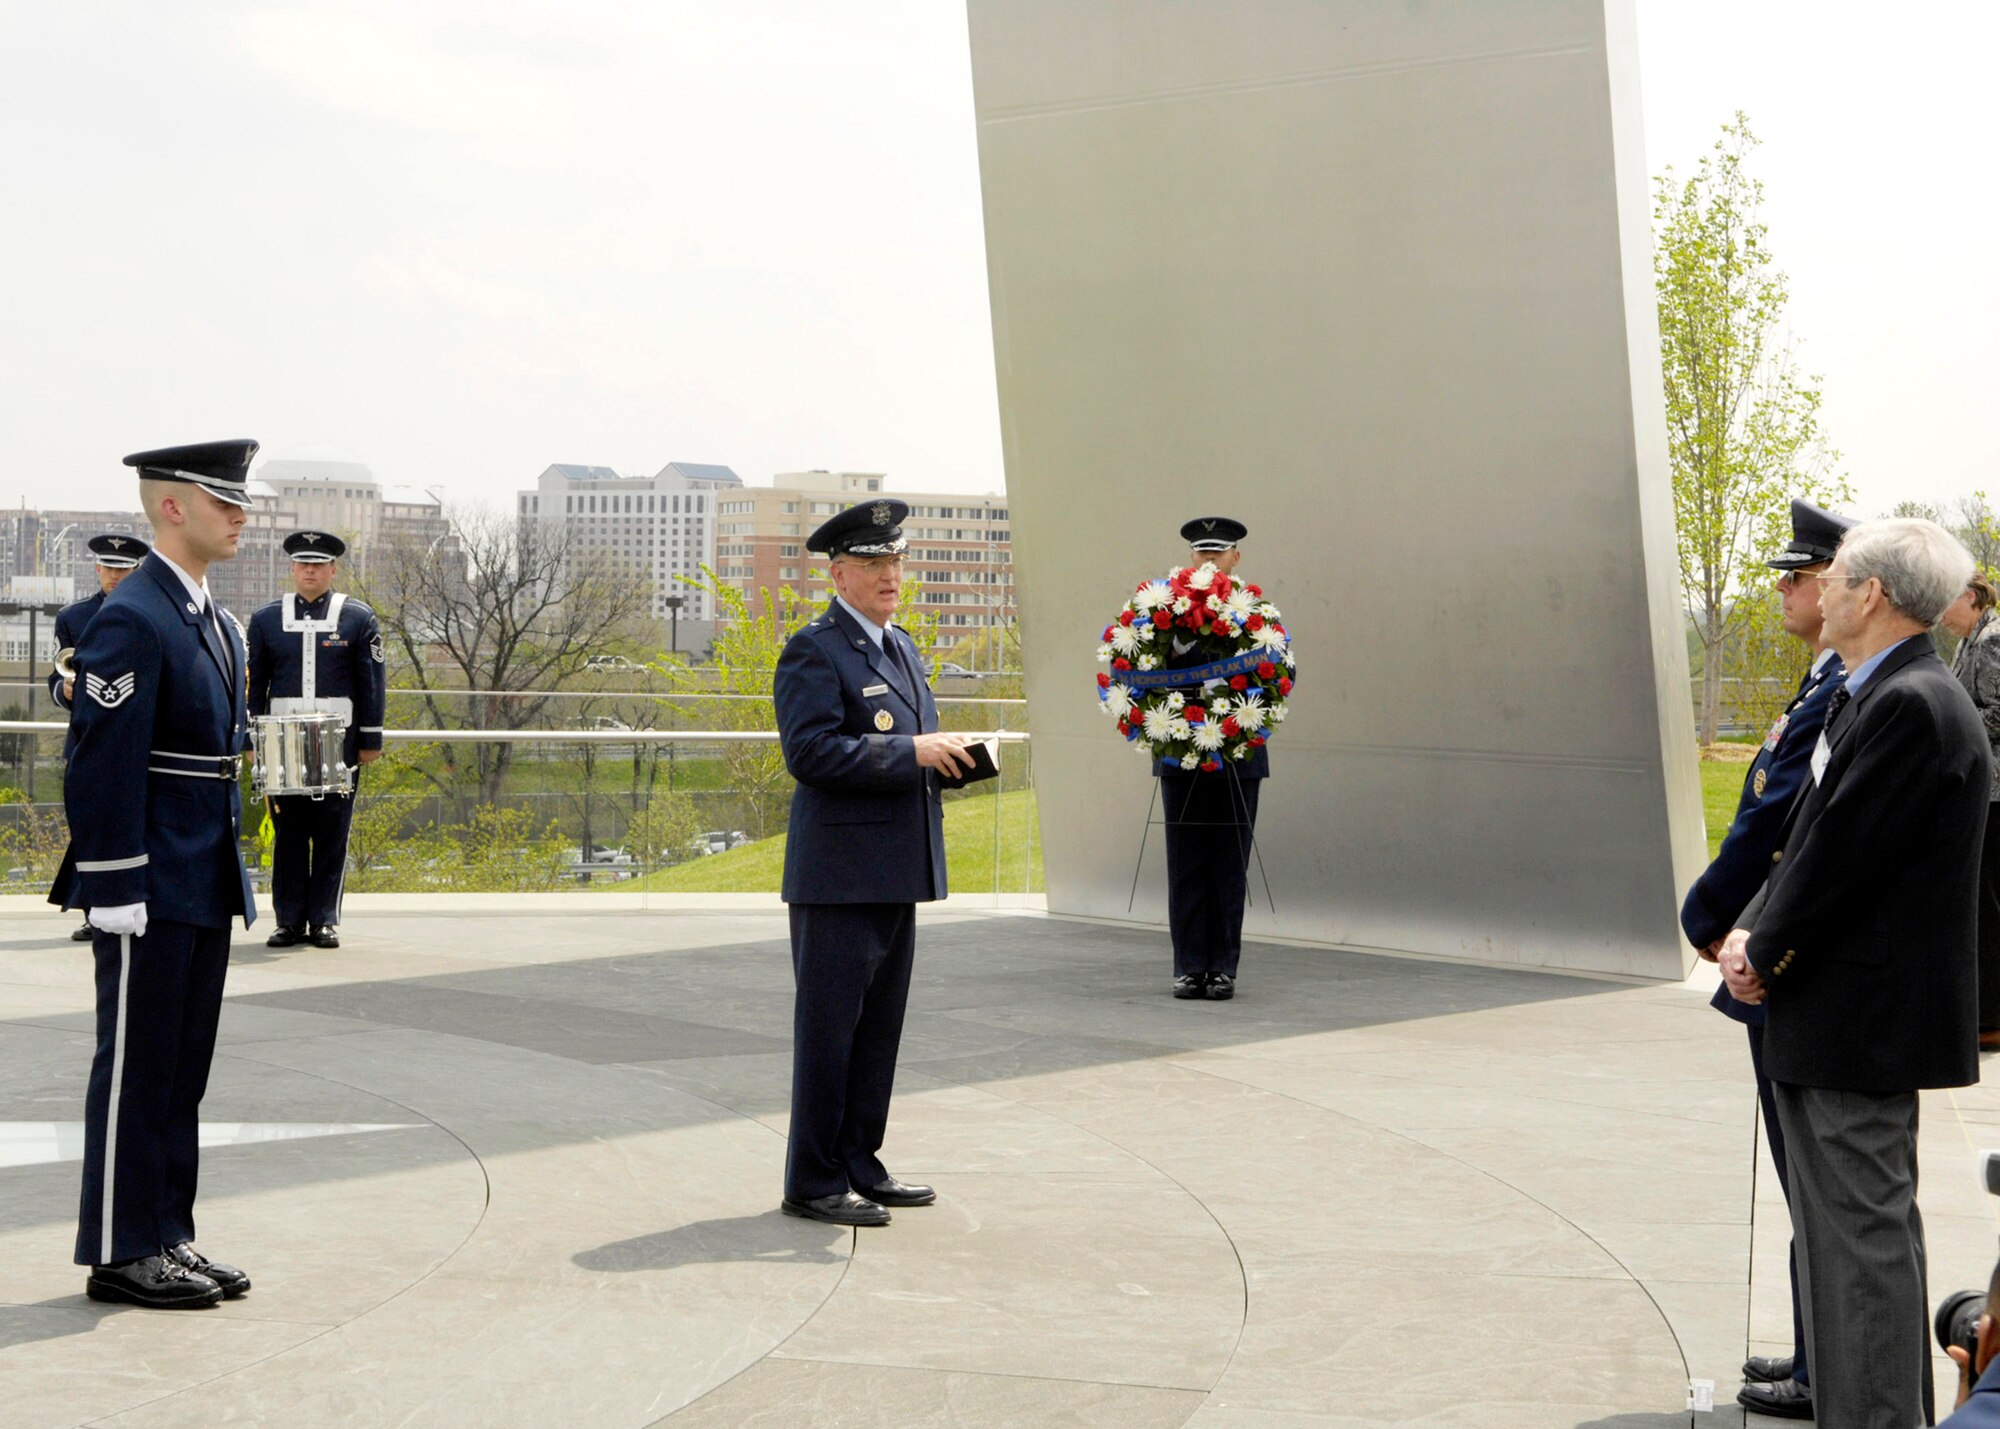 A wreath-laying ceremony in honor of the "Flak Man" B-24 Liberator crew was held April 24 in Washington, D.C.The bomber crew members were also awarded the Distinguished Flying Cross 63 years after their encounter with heavy anti-aircraft fire July 15, 1944. Despite losing one engine, the crew managed to complete their mission by bombing the Nazi's oil refinery lifeline in Romania. They were shot down the next day while participating in a raid over Austria and were taken prisoner of war.(U.S. Air Force photo/Senior Airman Rusti Caraker)